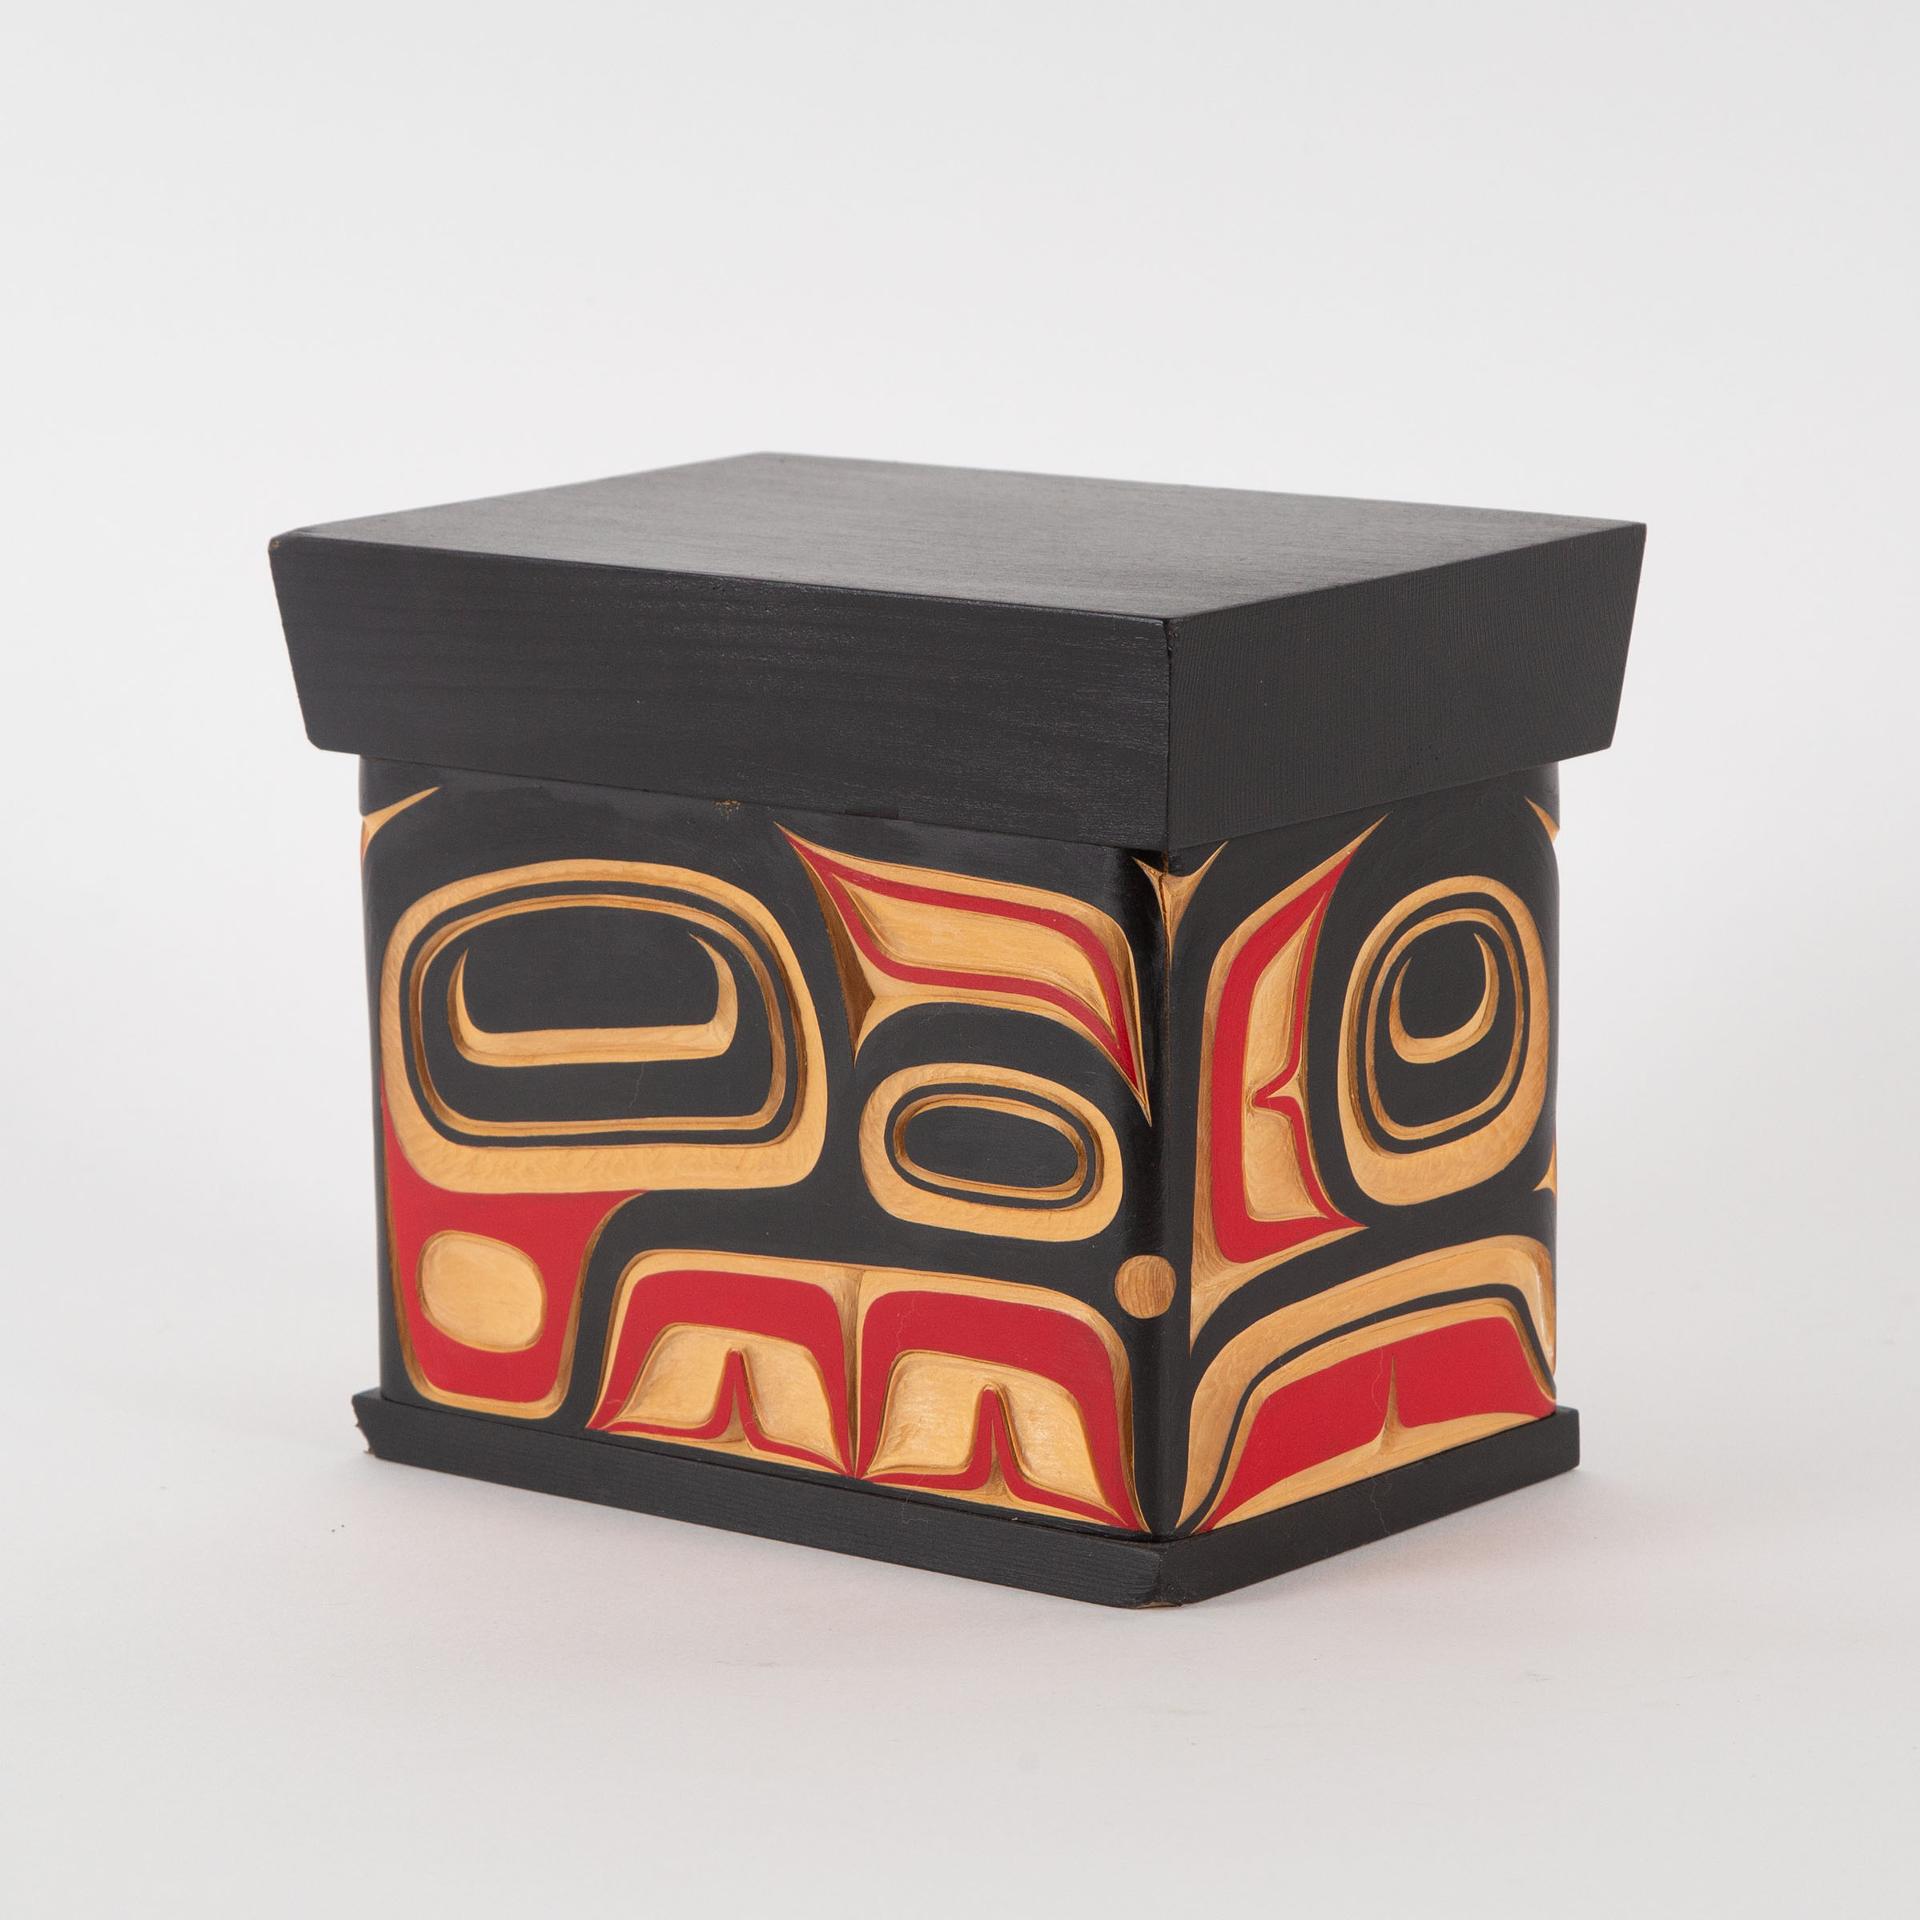 Beau Dick (1955-2017) - Carved Bentwood Box